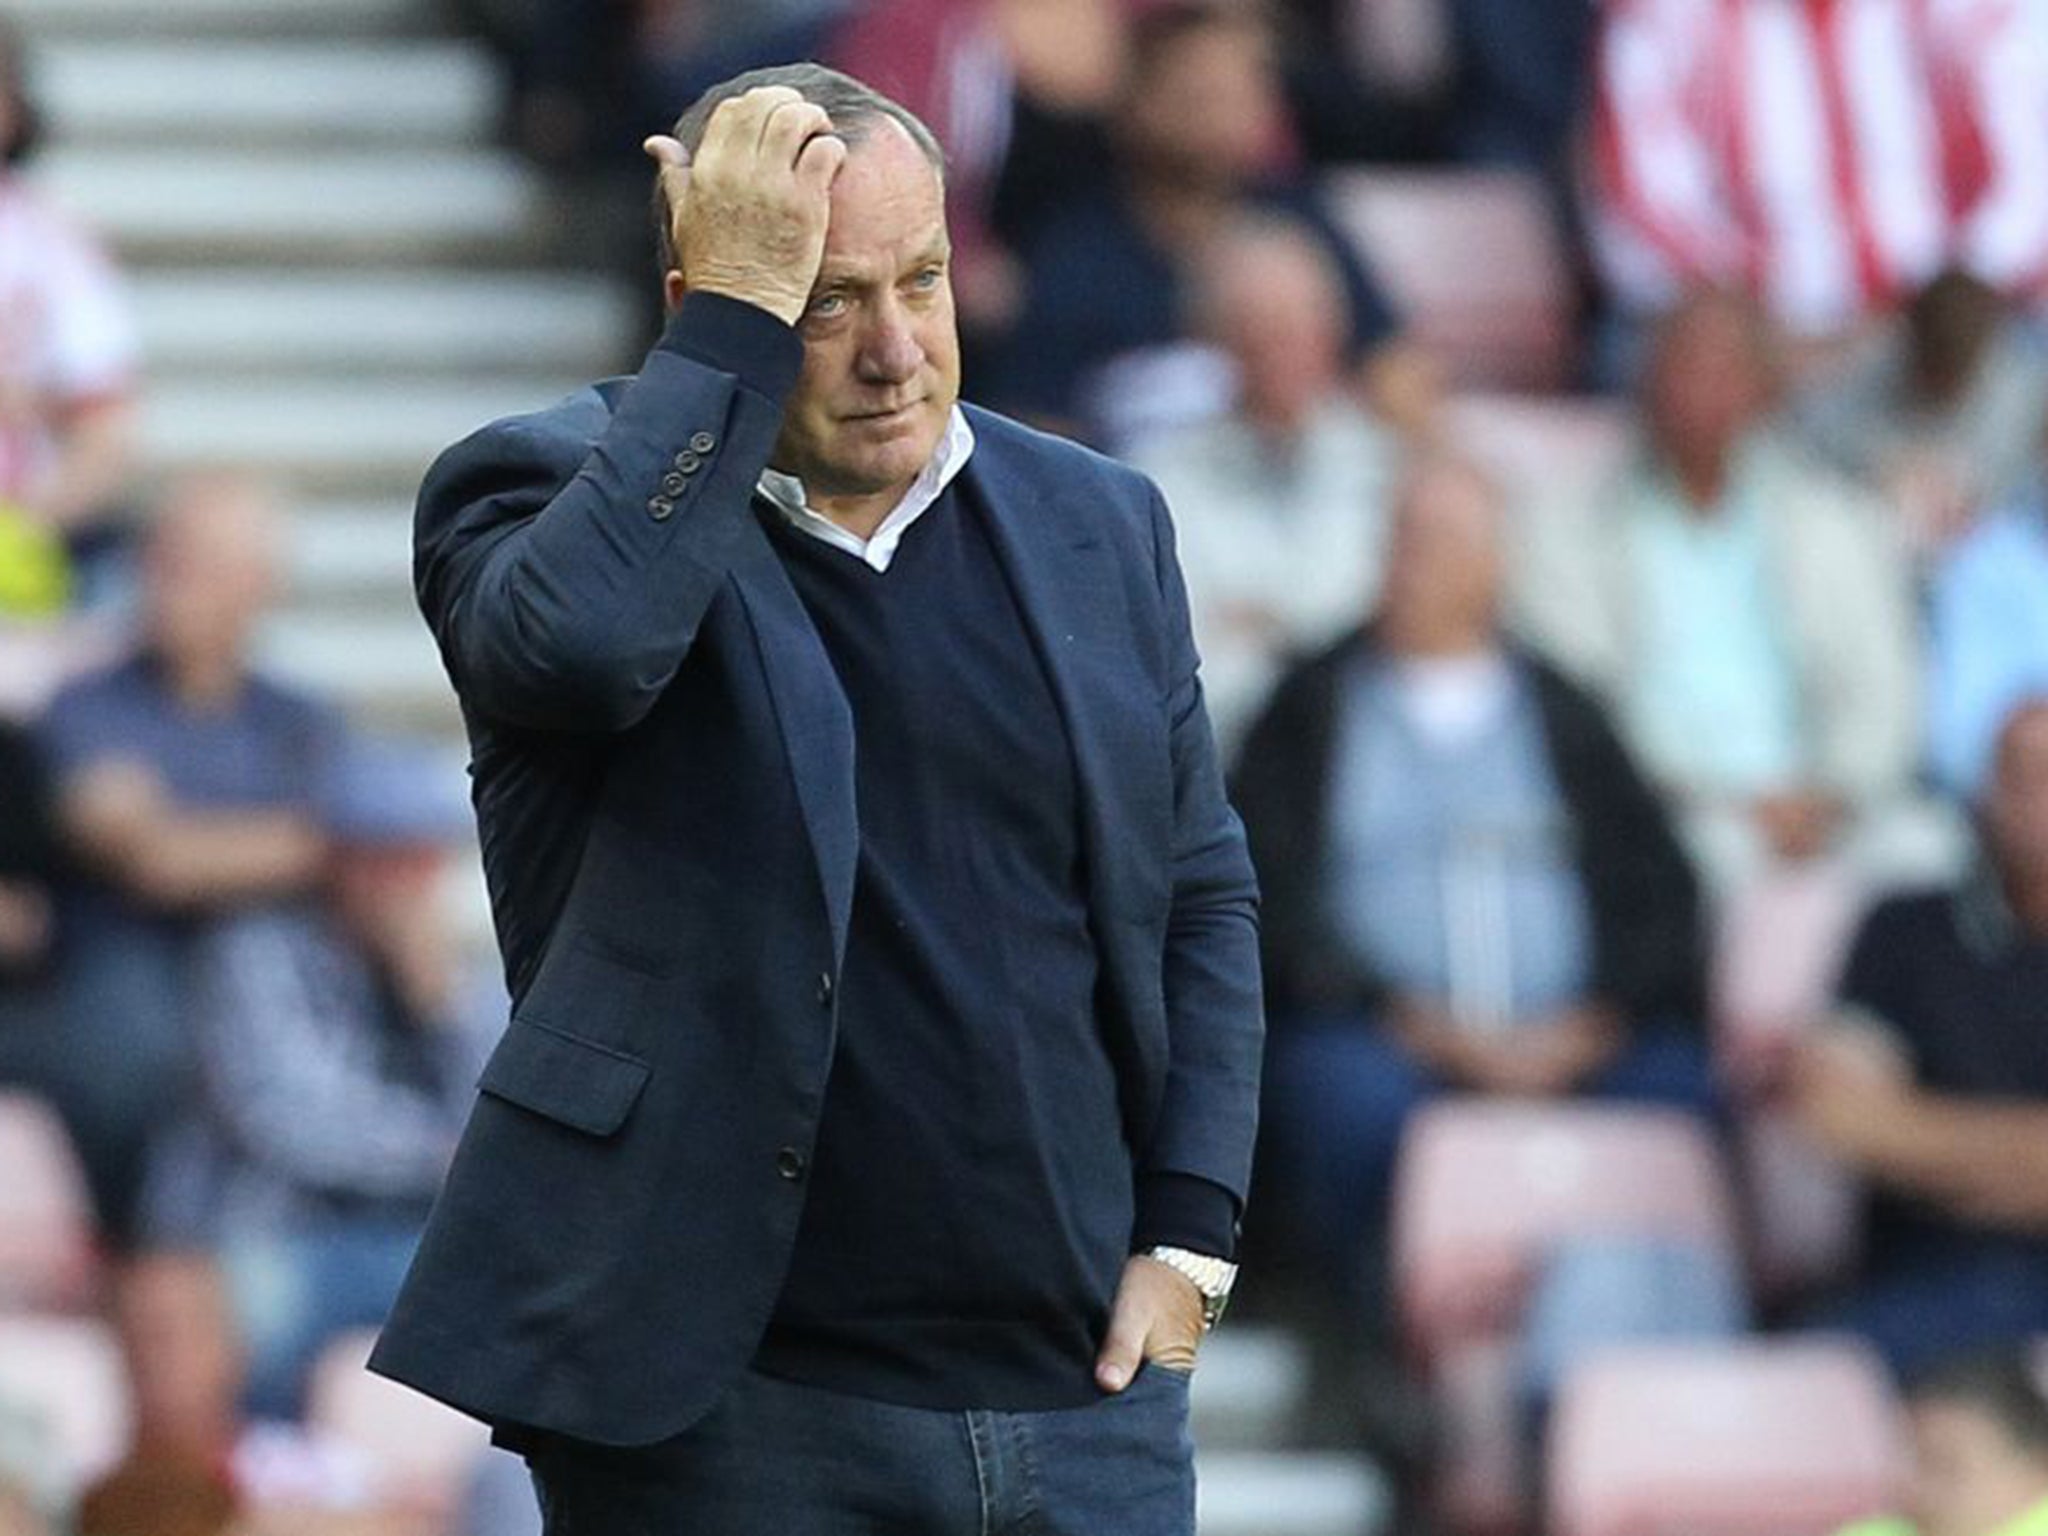 Dick Advocaat felt Sunderland were ill-equipped to stay up given their lack of spending